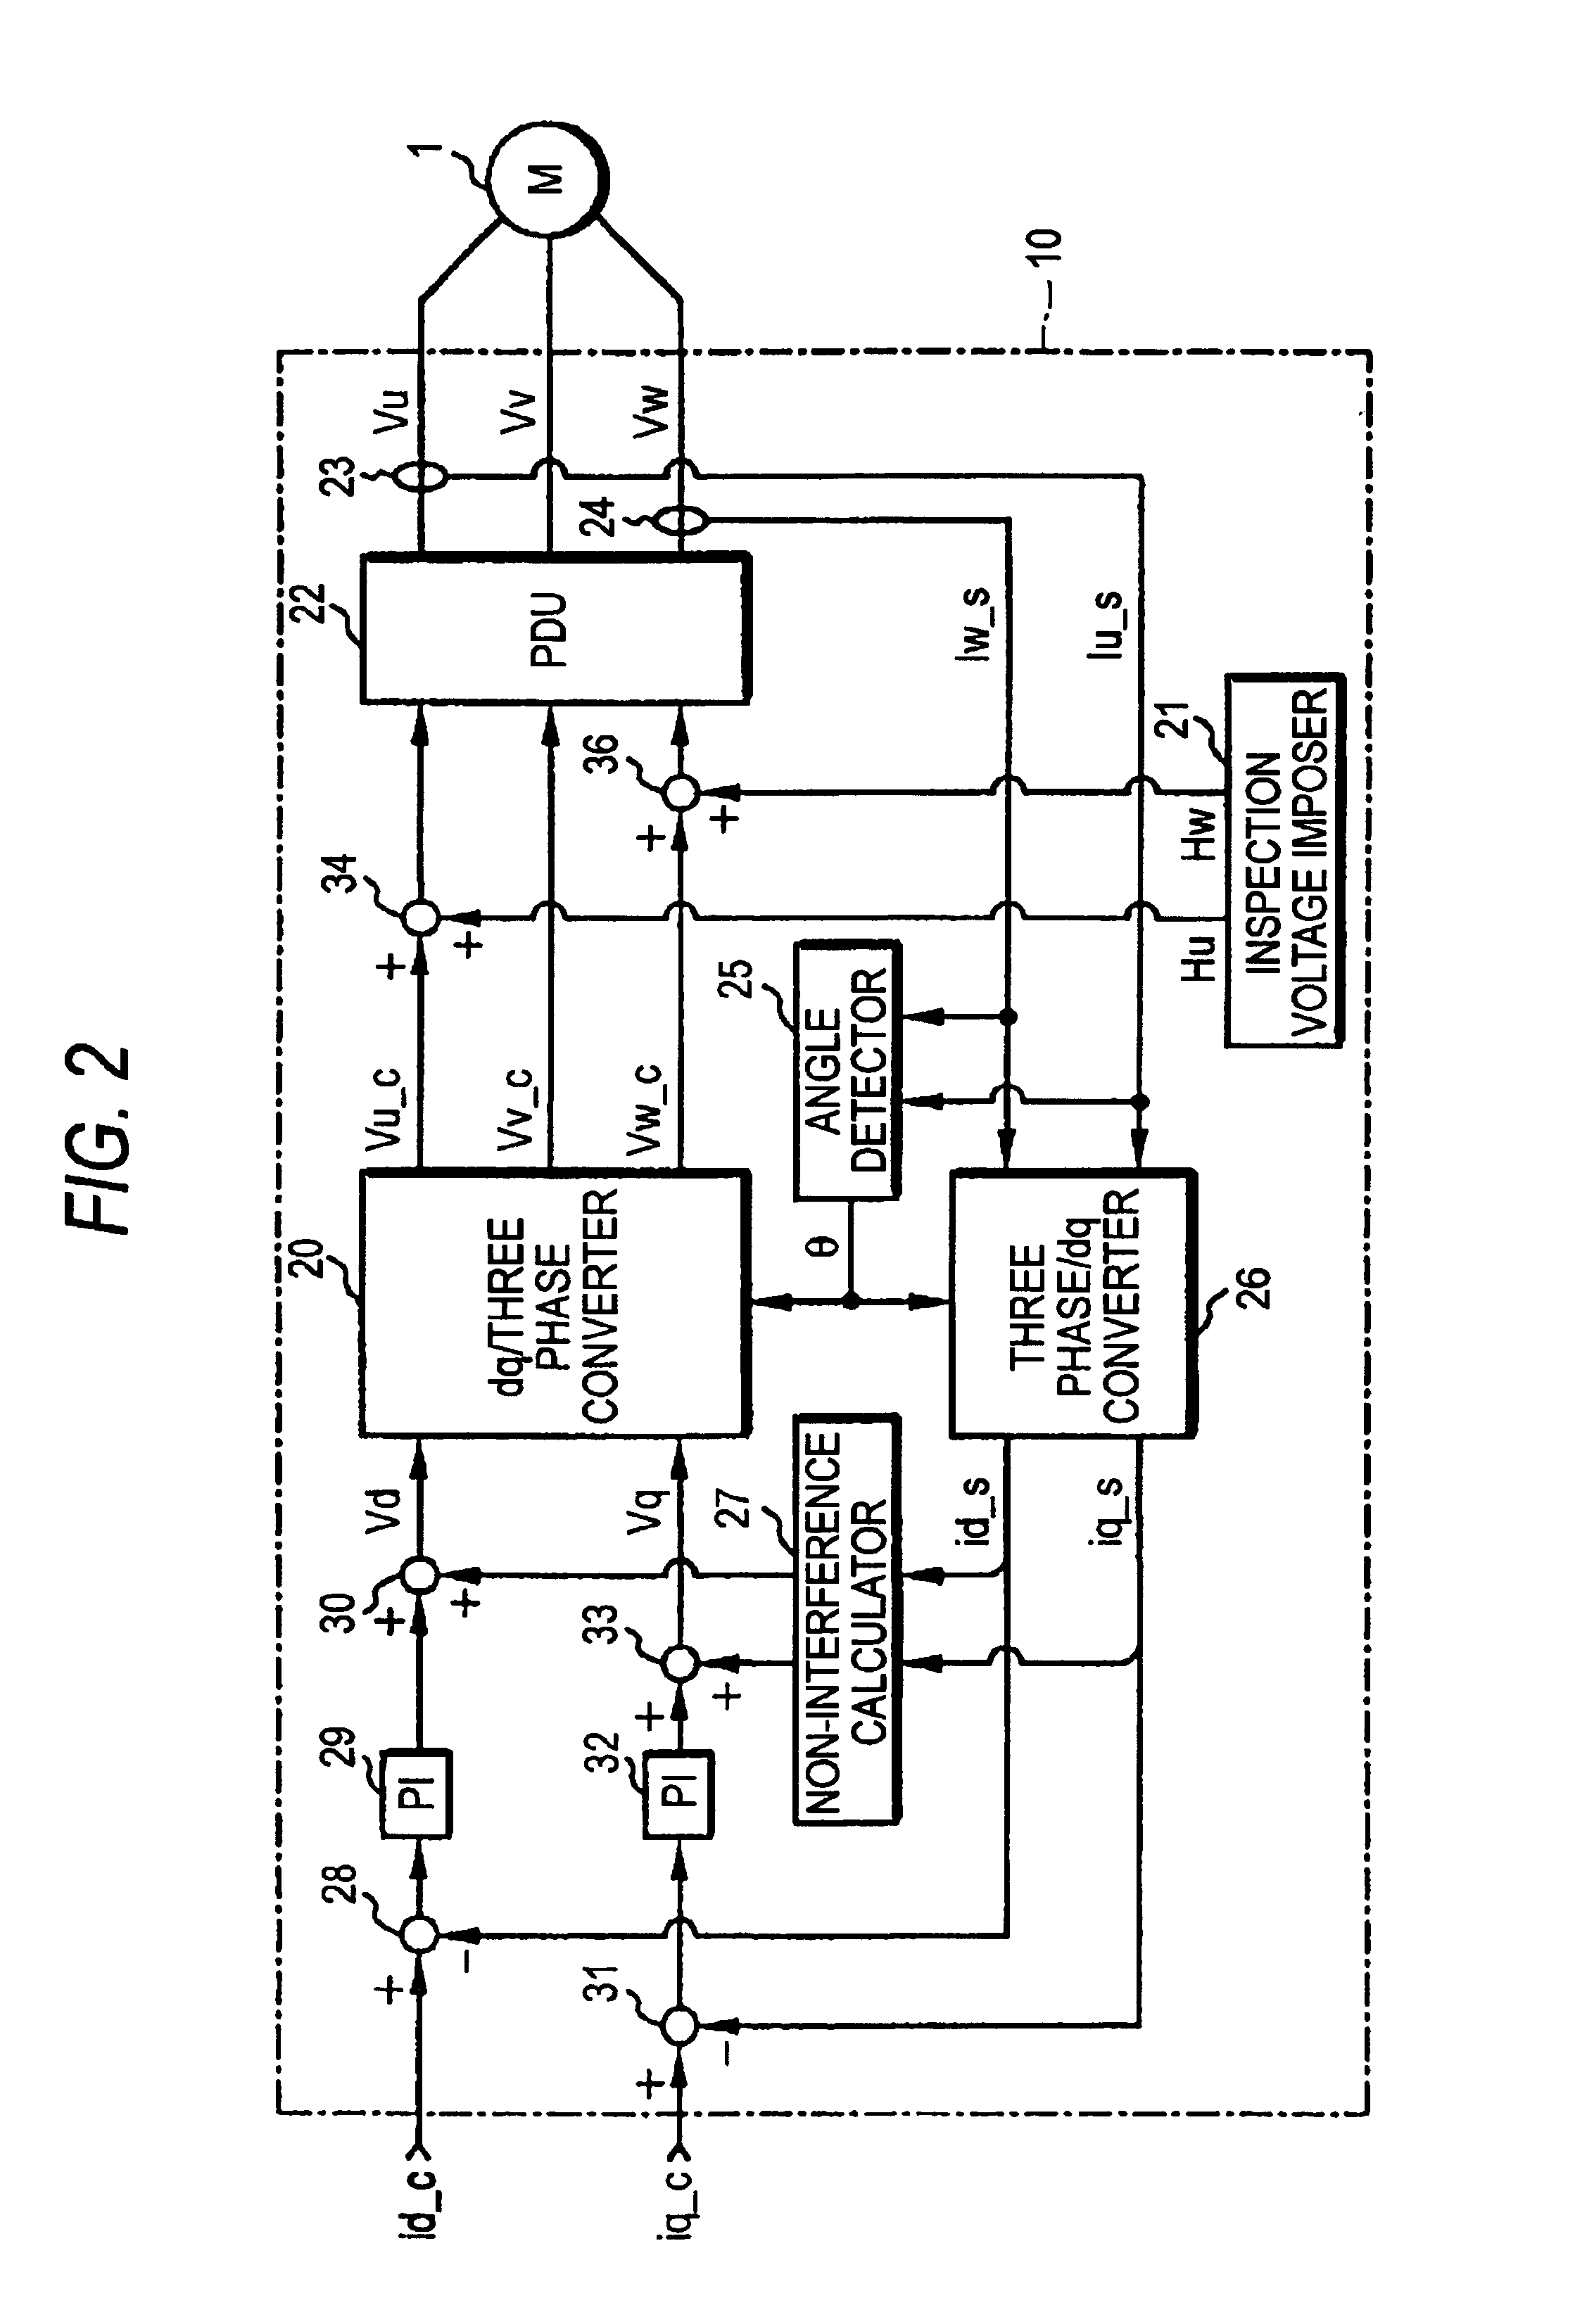 Rotor angle detecting apparatus for DC brushless motor